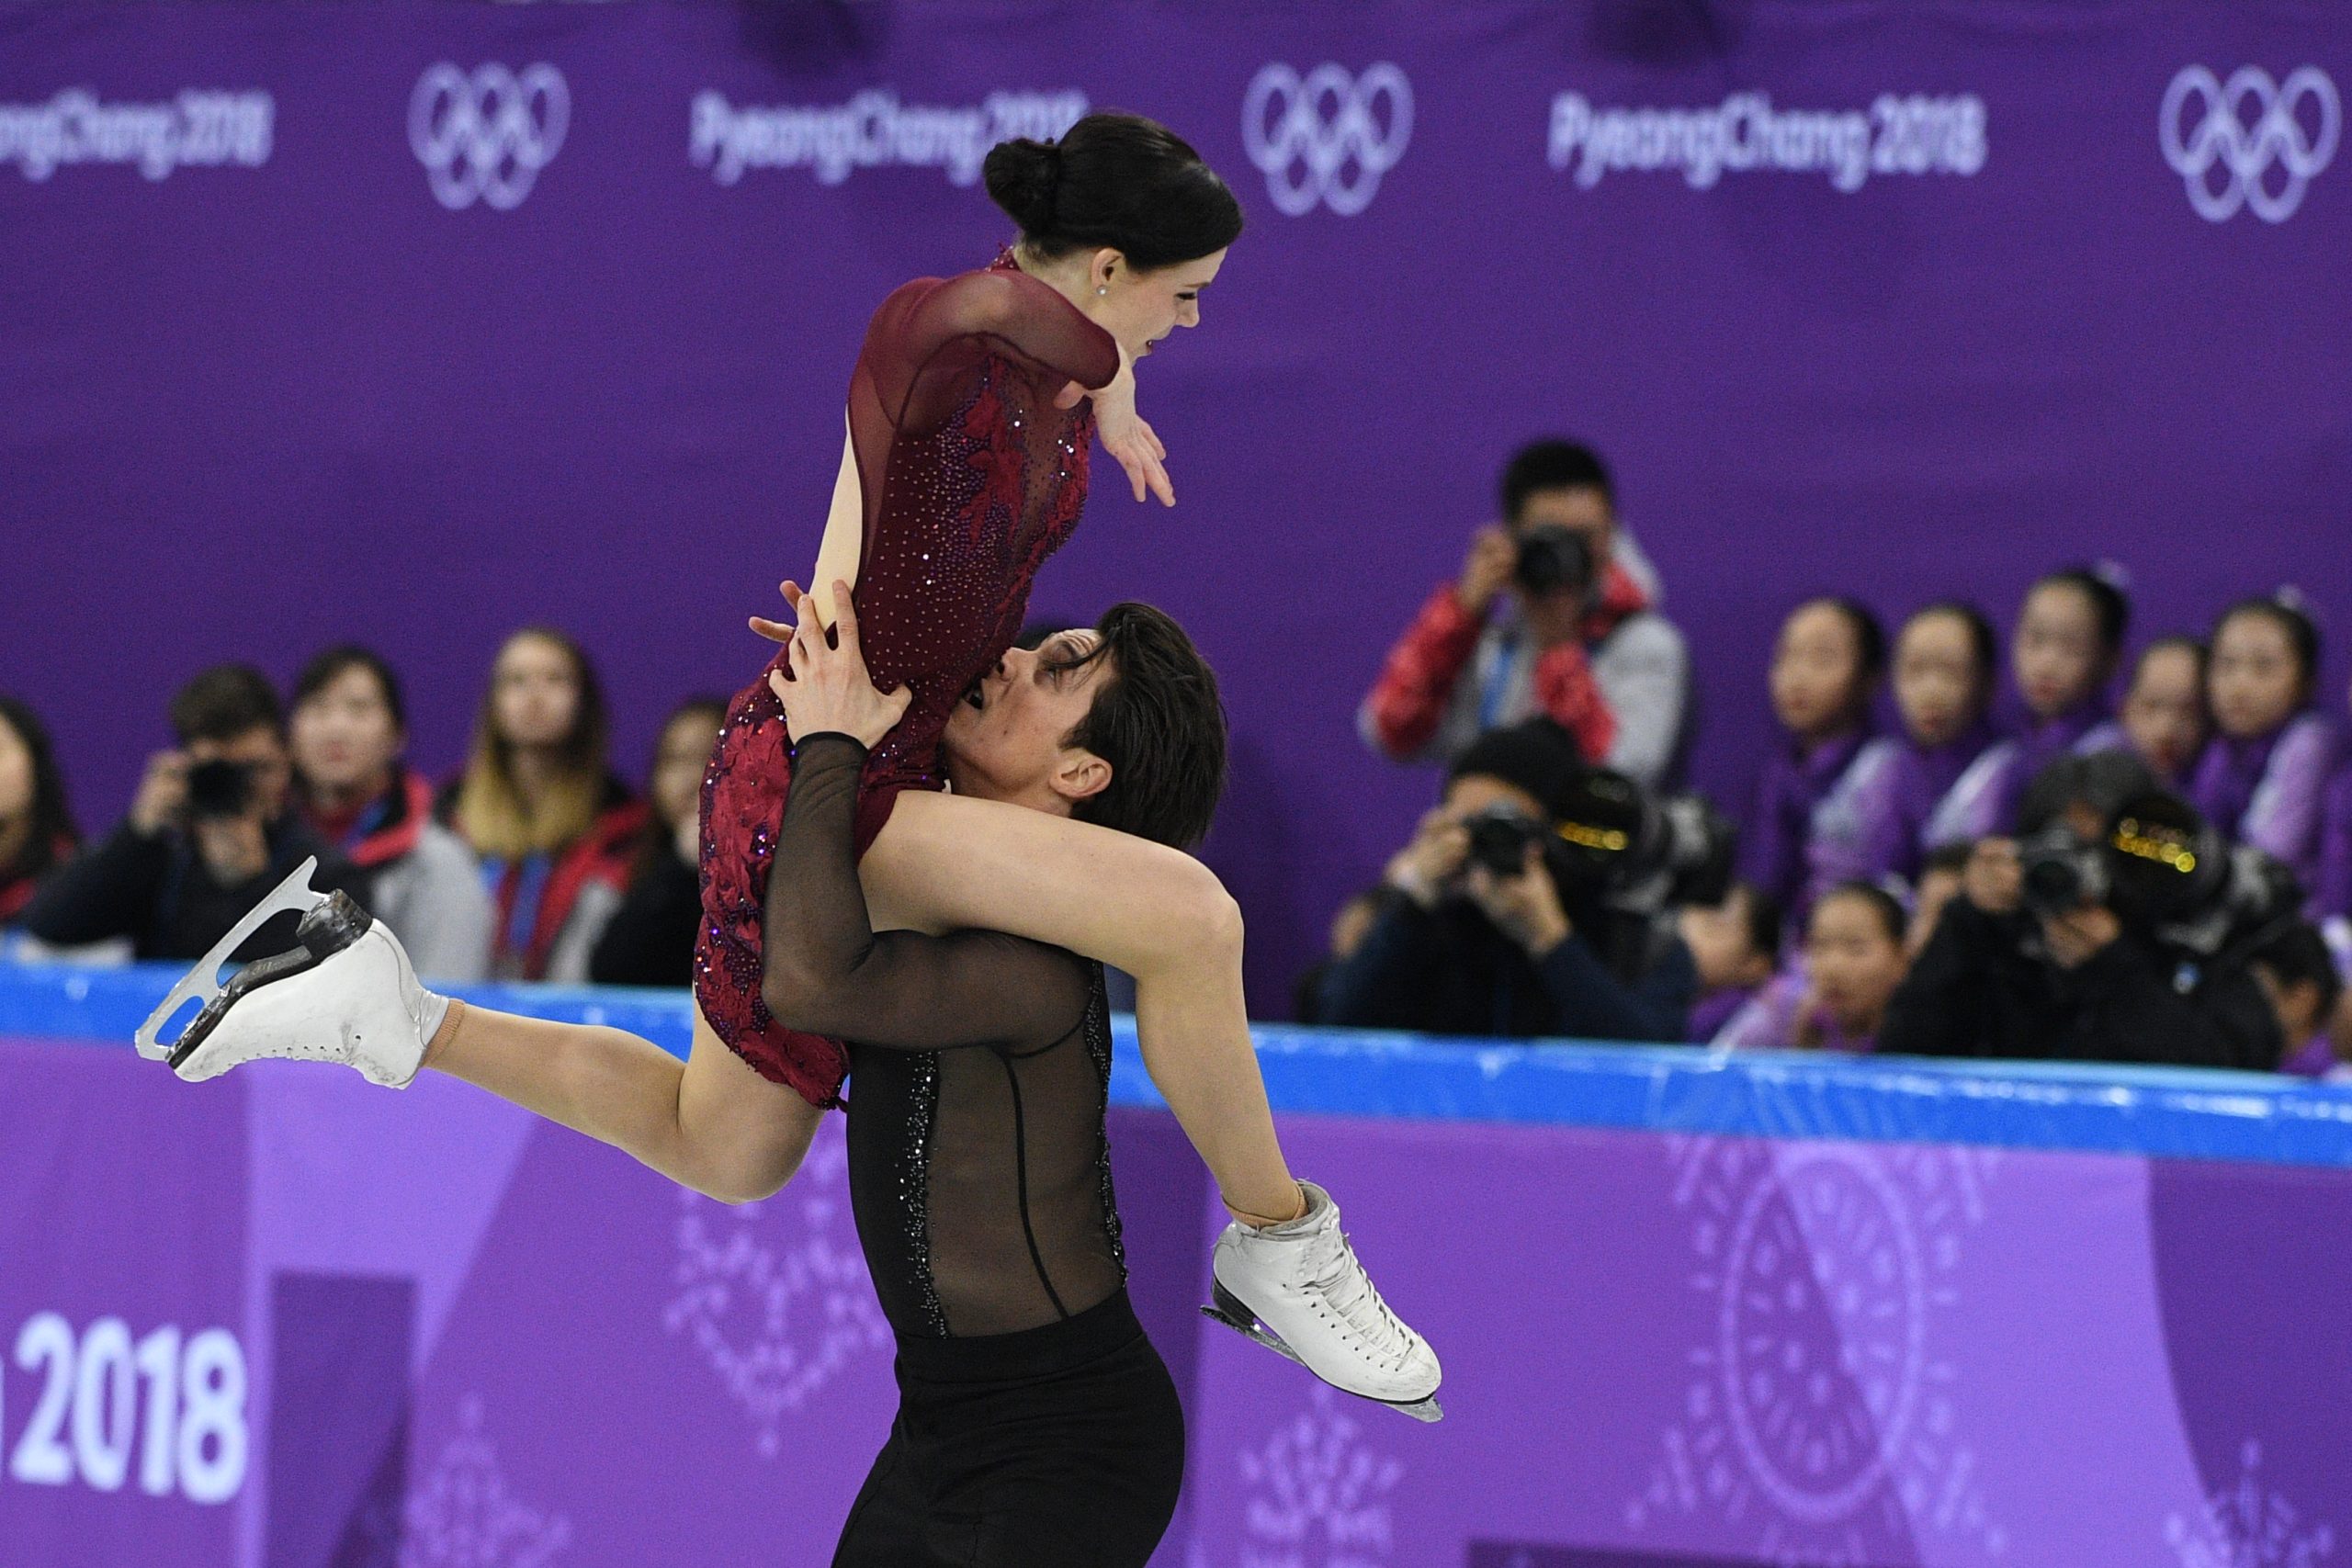 The Canadians also won the gold medal in the team competition